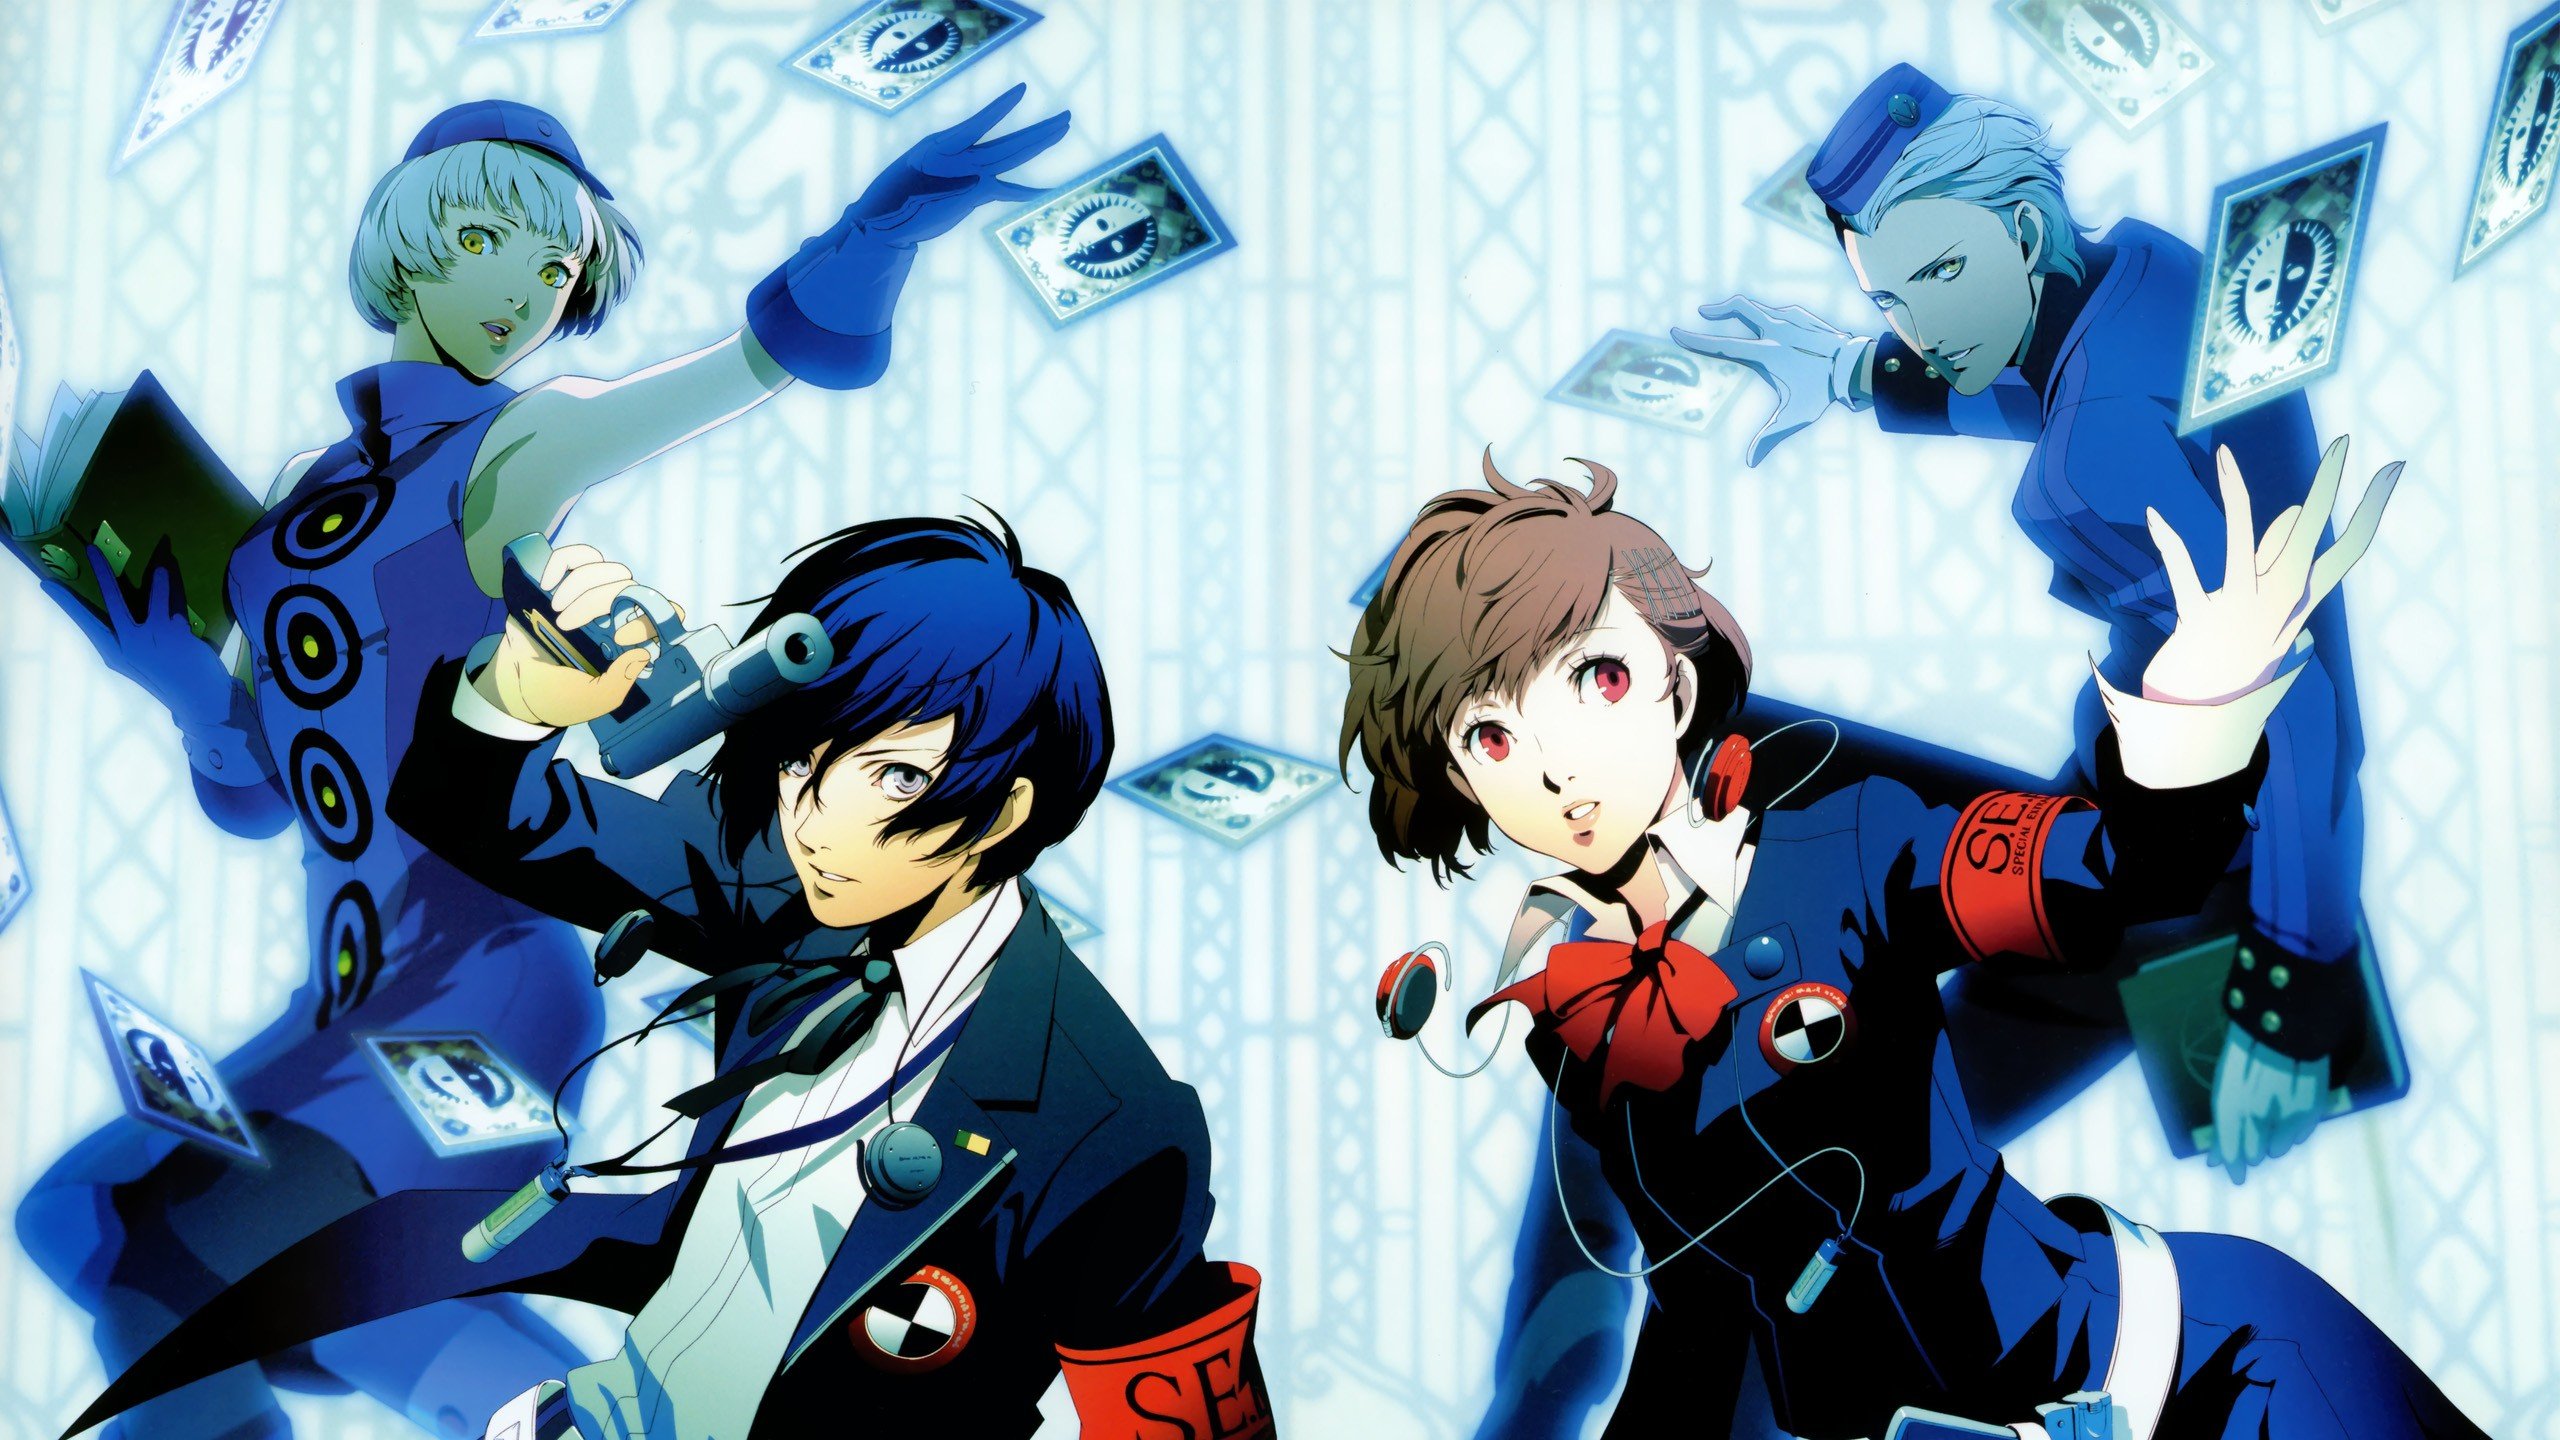 Persona 3 soundtrack tpb torrent build your own house mod skyrim download torrent